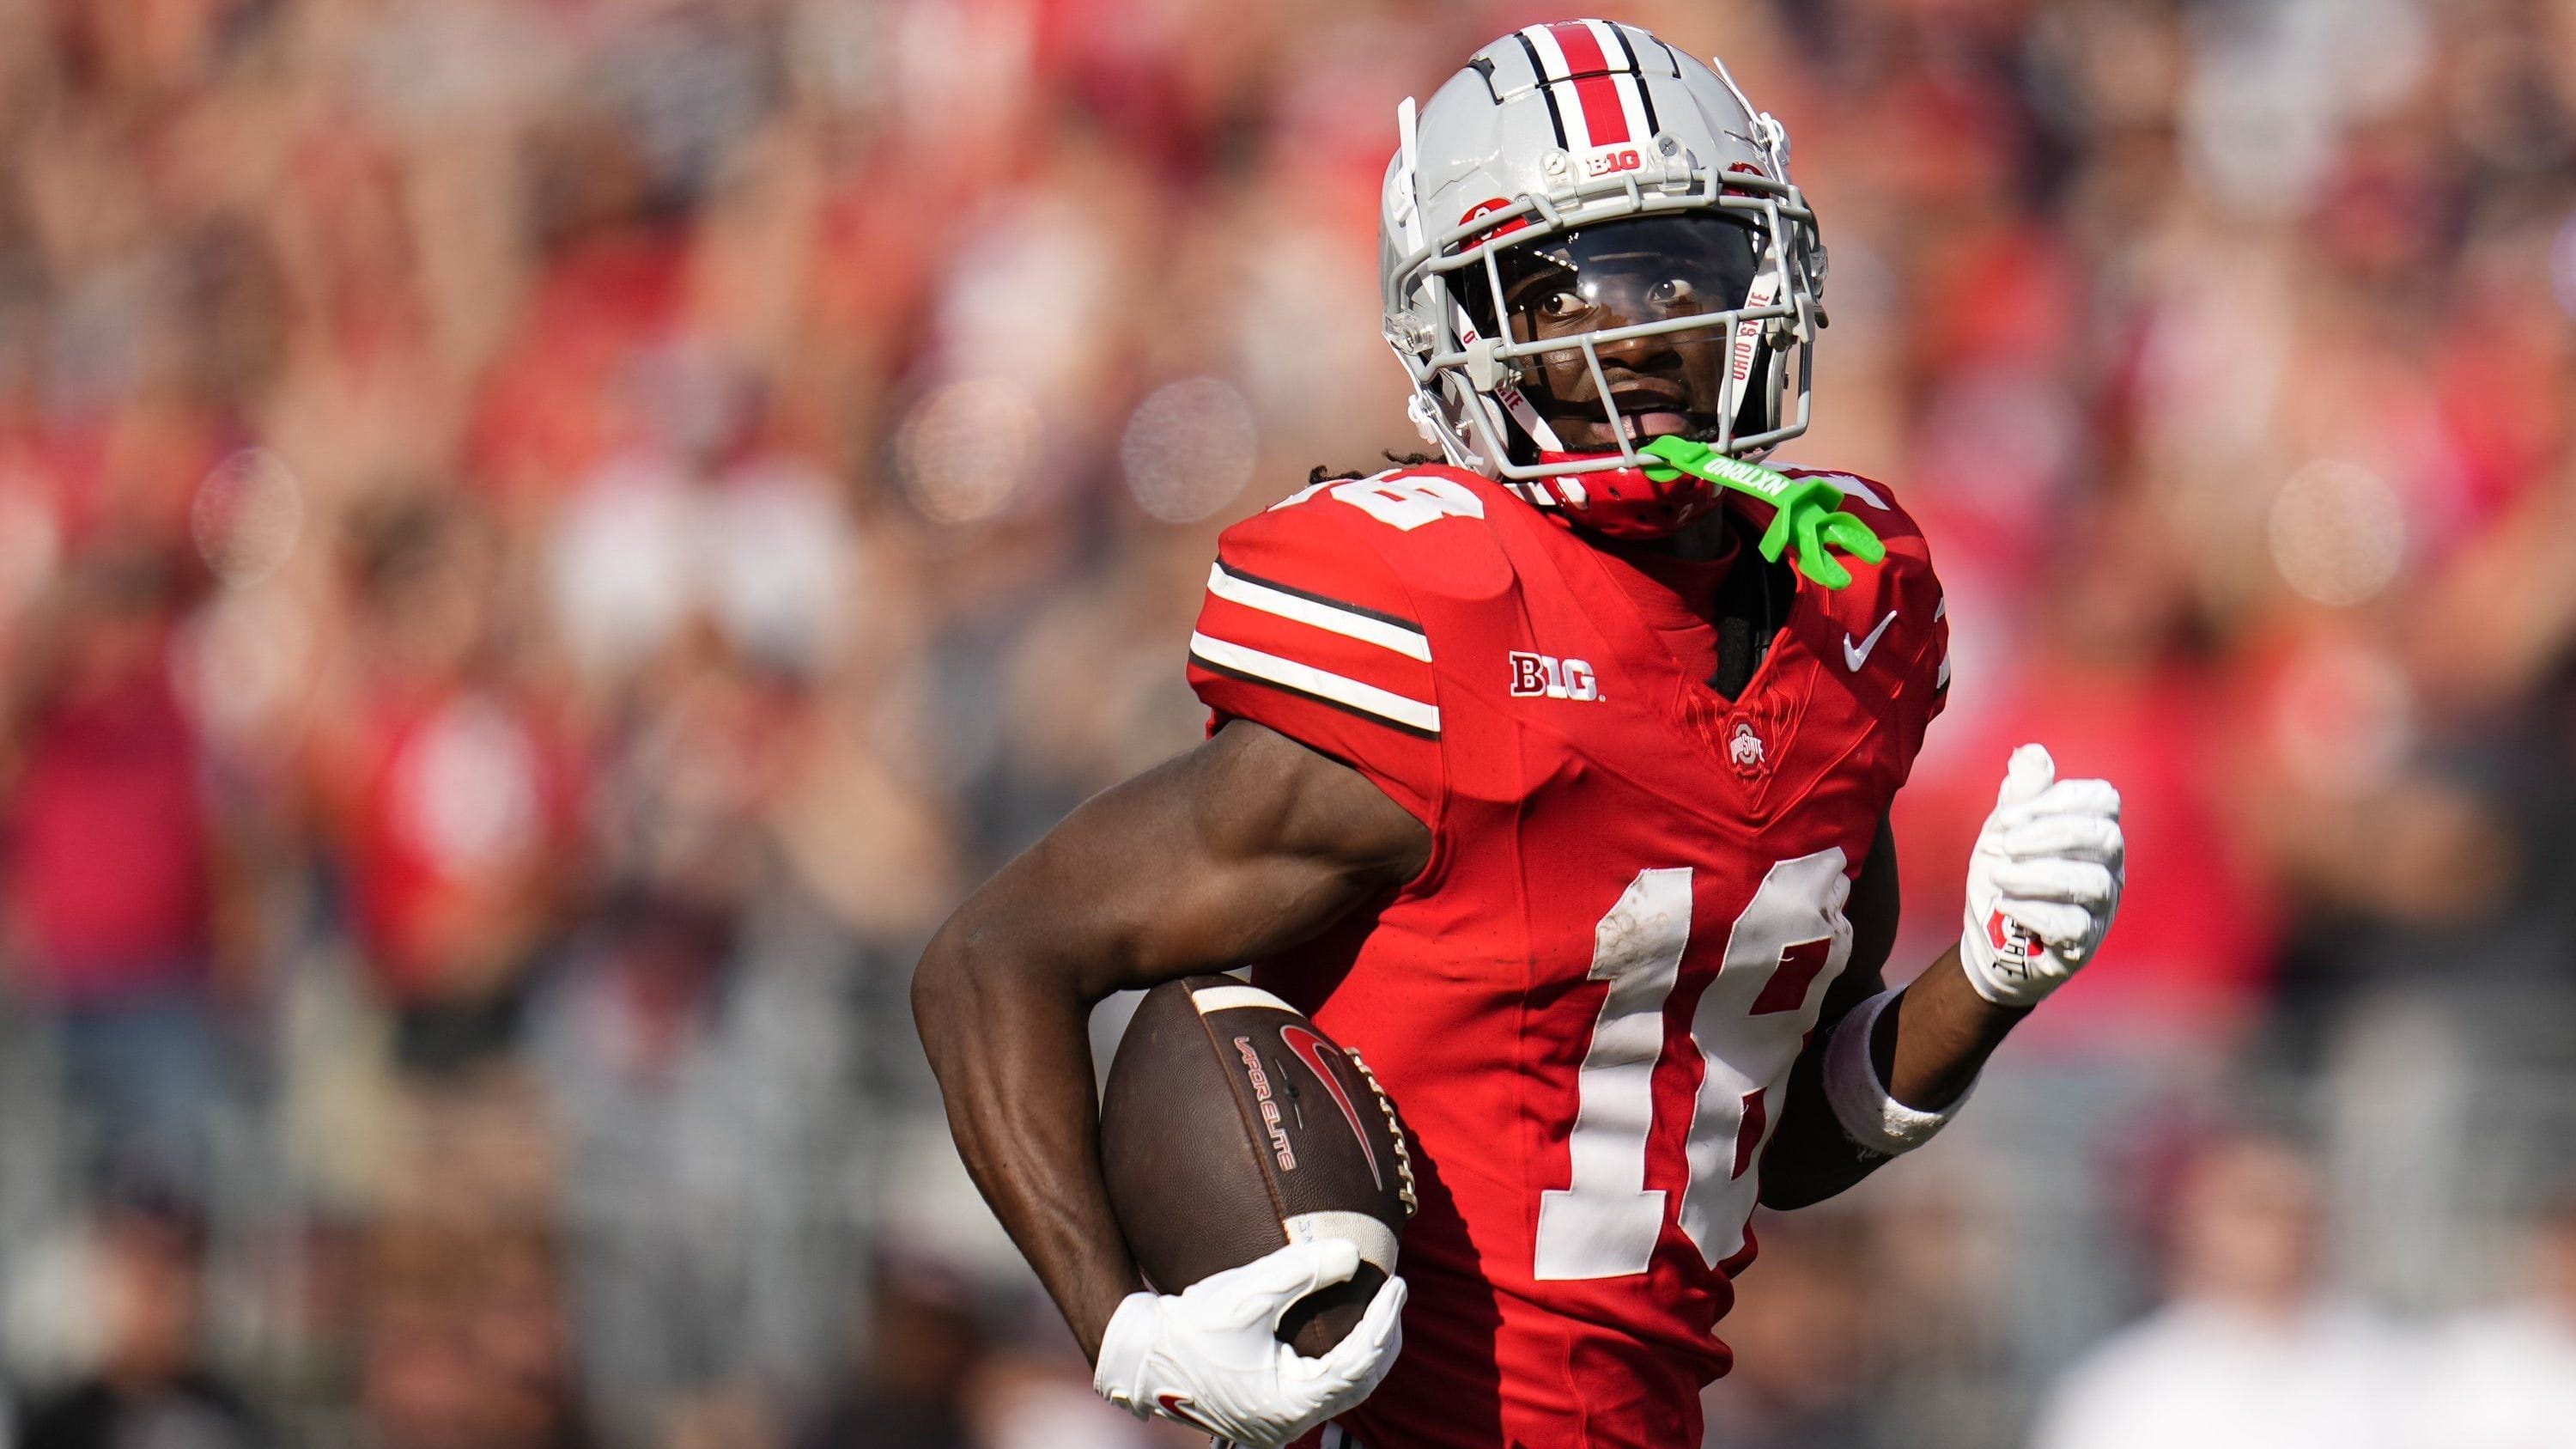 Ohio State Buckeyes in the NFL Draft: How to Watch